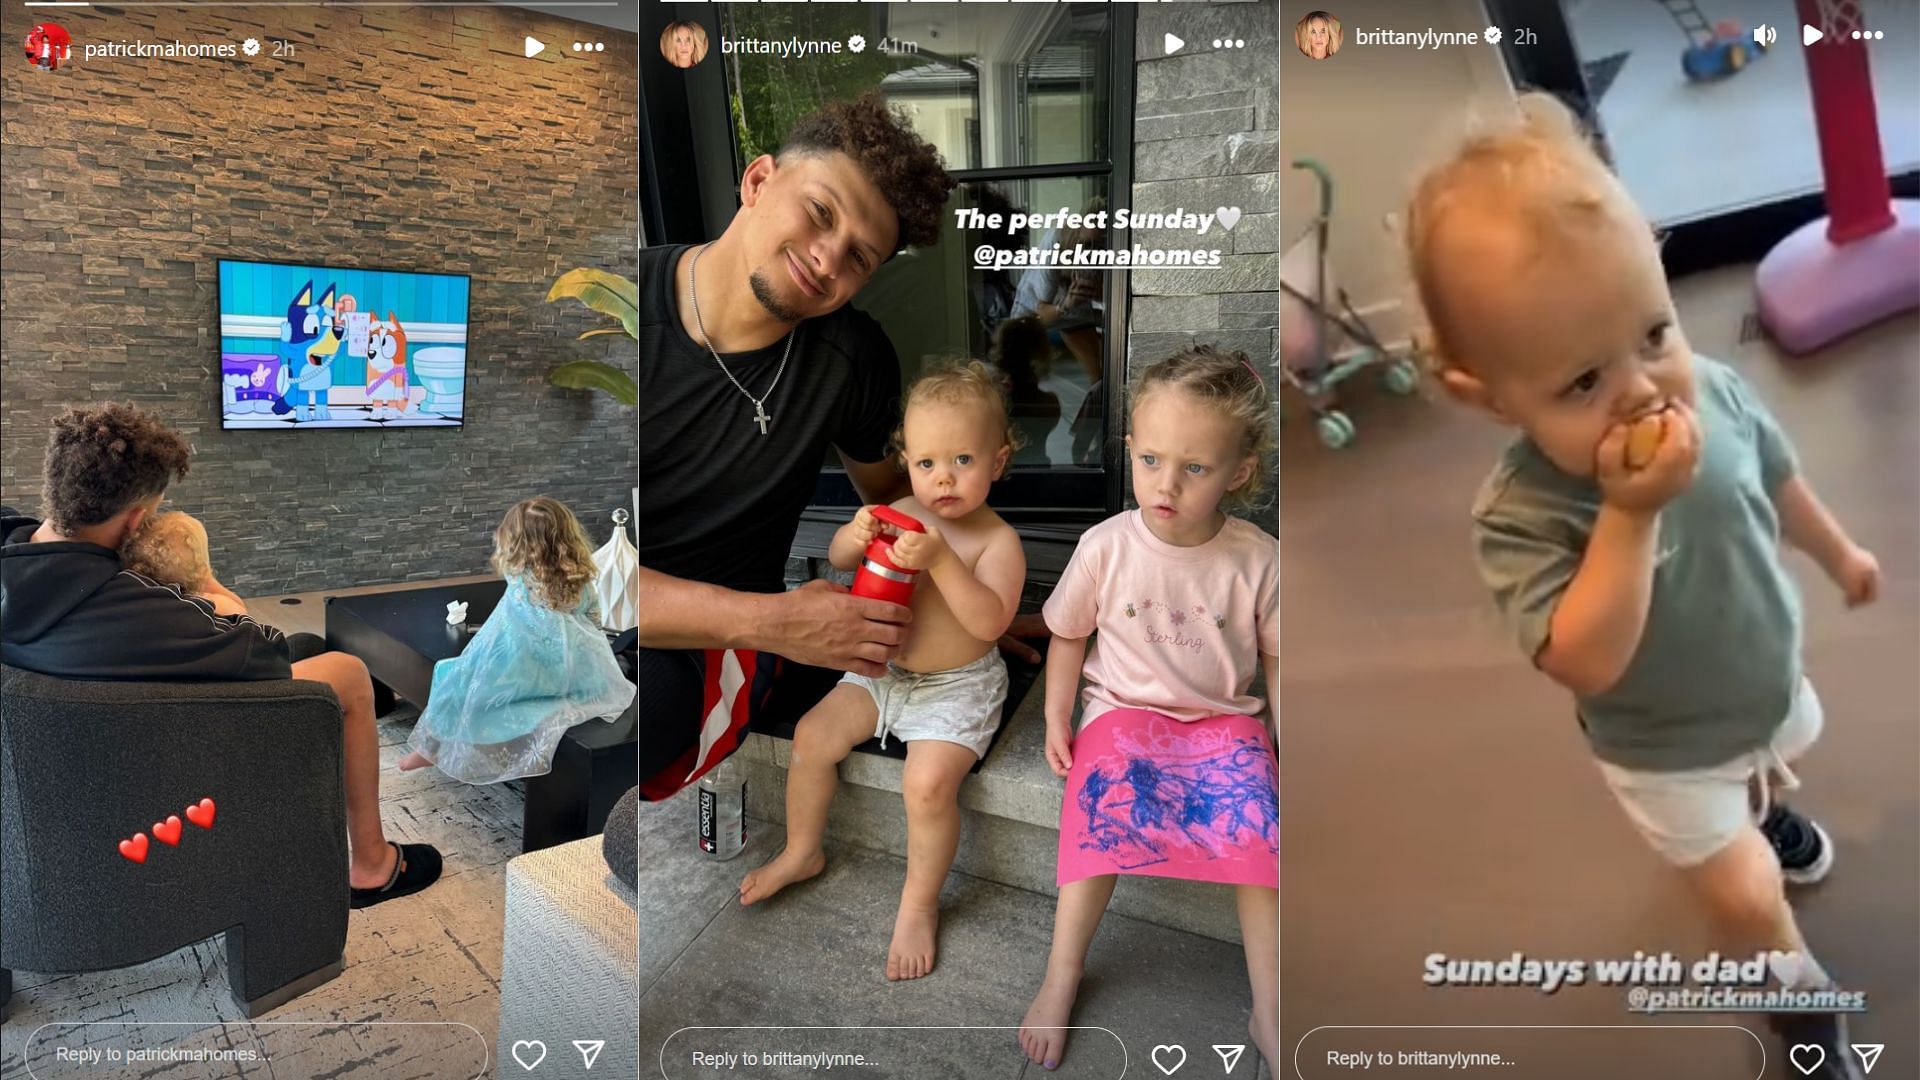 Patrick Mahomes cuddles son Bronze, daughter Sterling during 